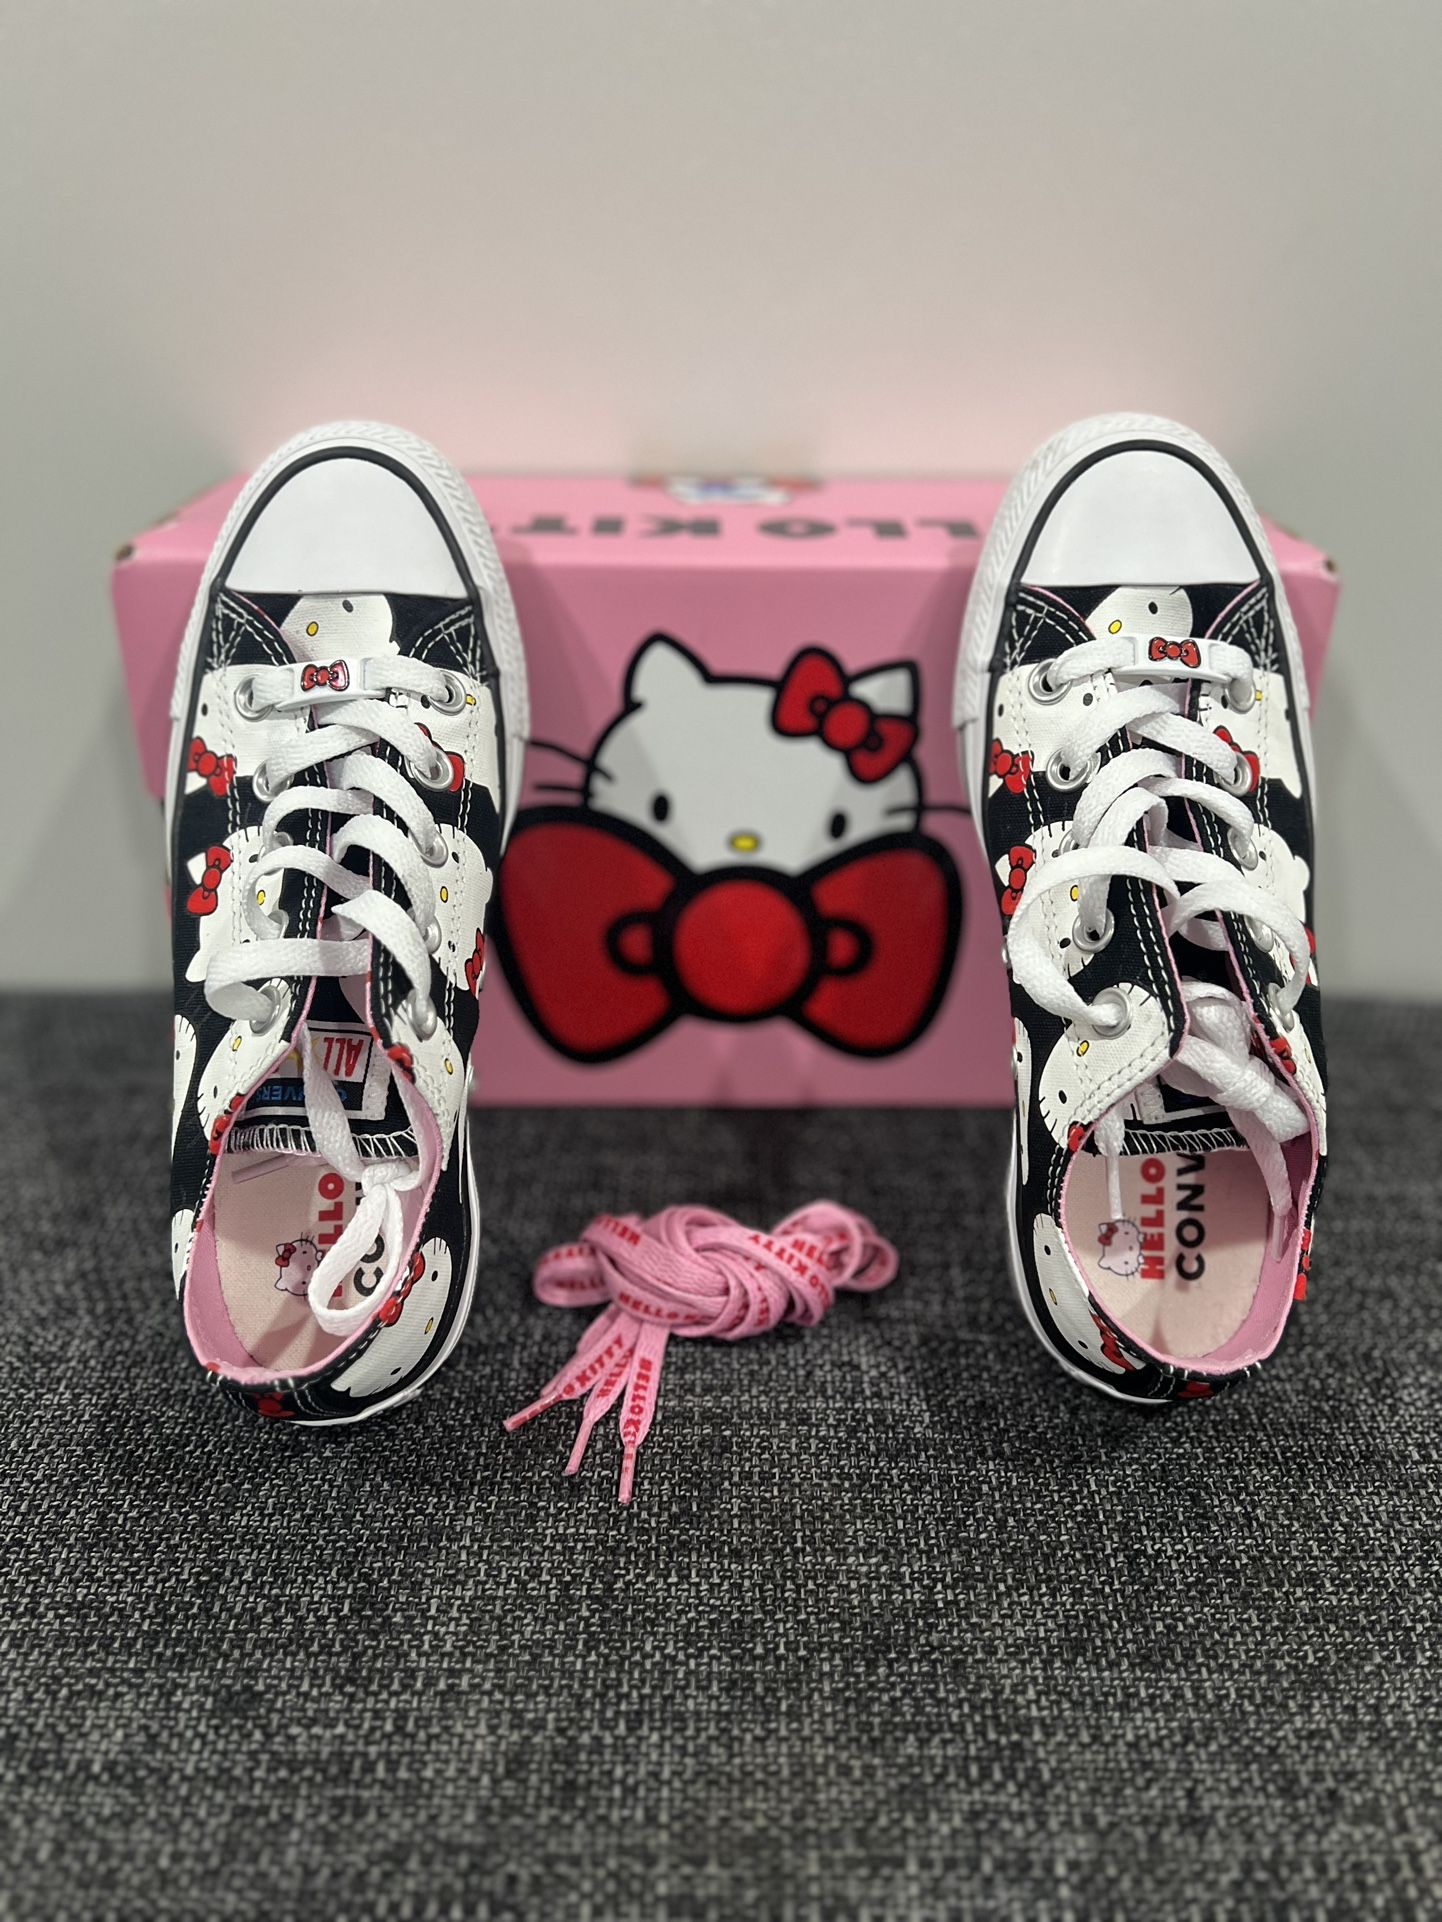 Limited edition! Converse Chuck Taylor All Star Ox Hello Kitty Black Size 5.5 Woman